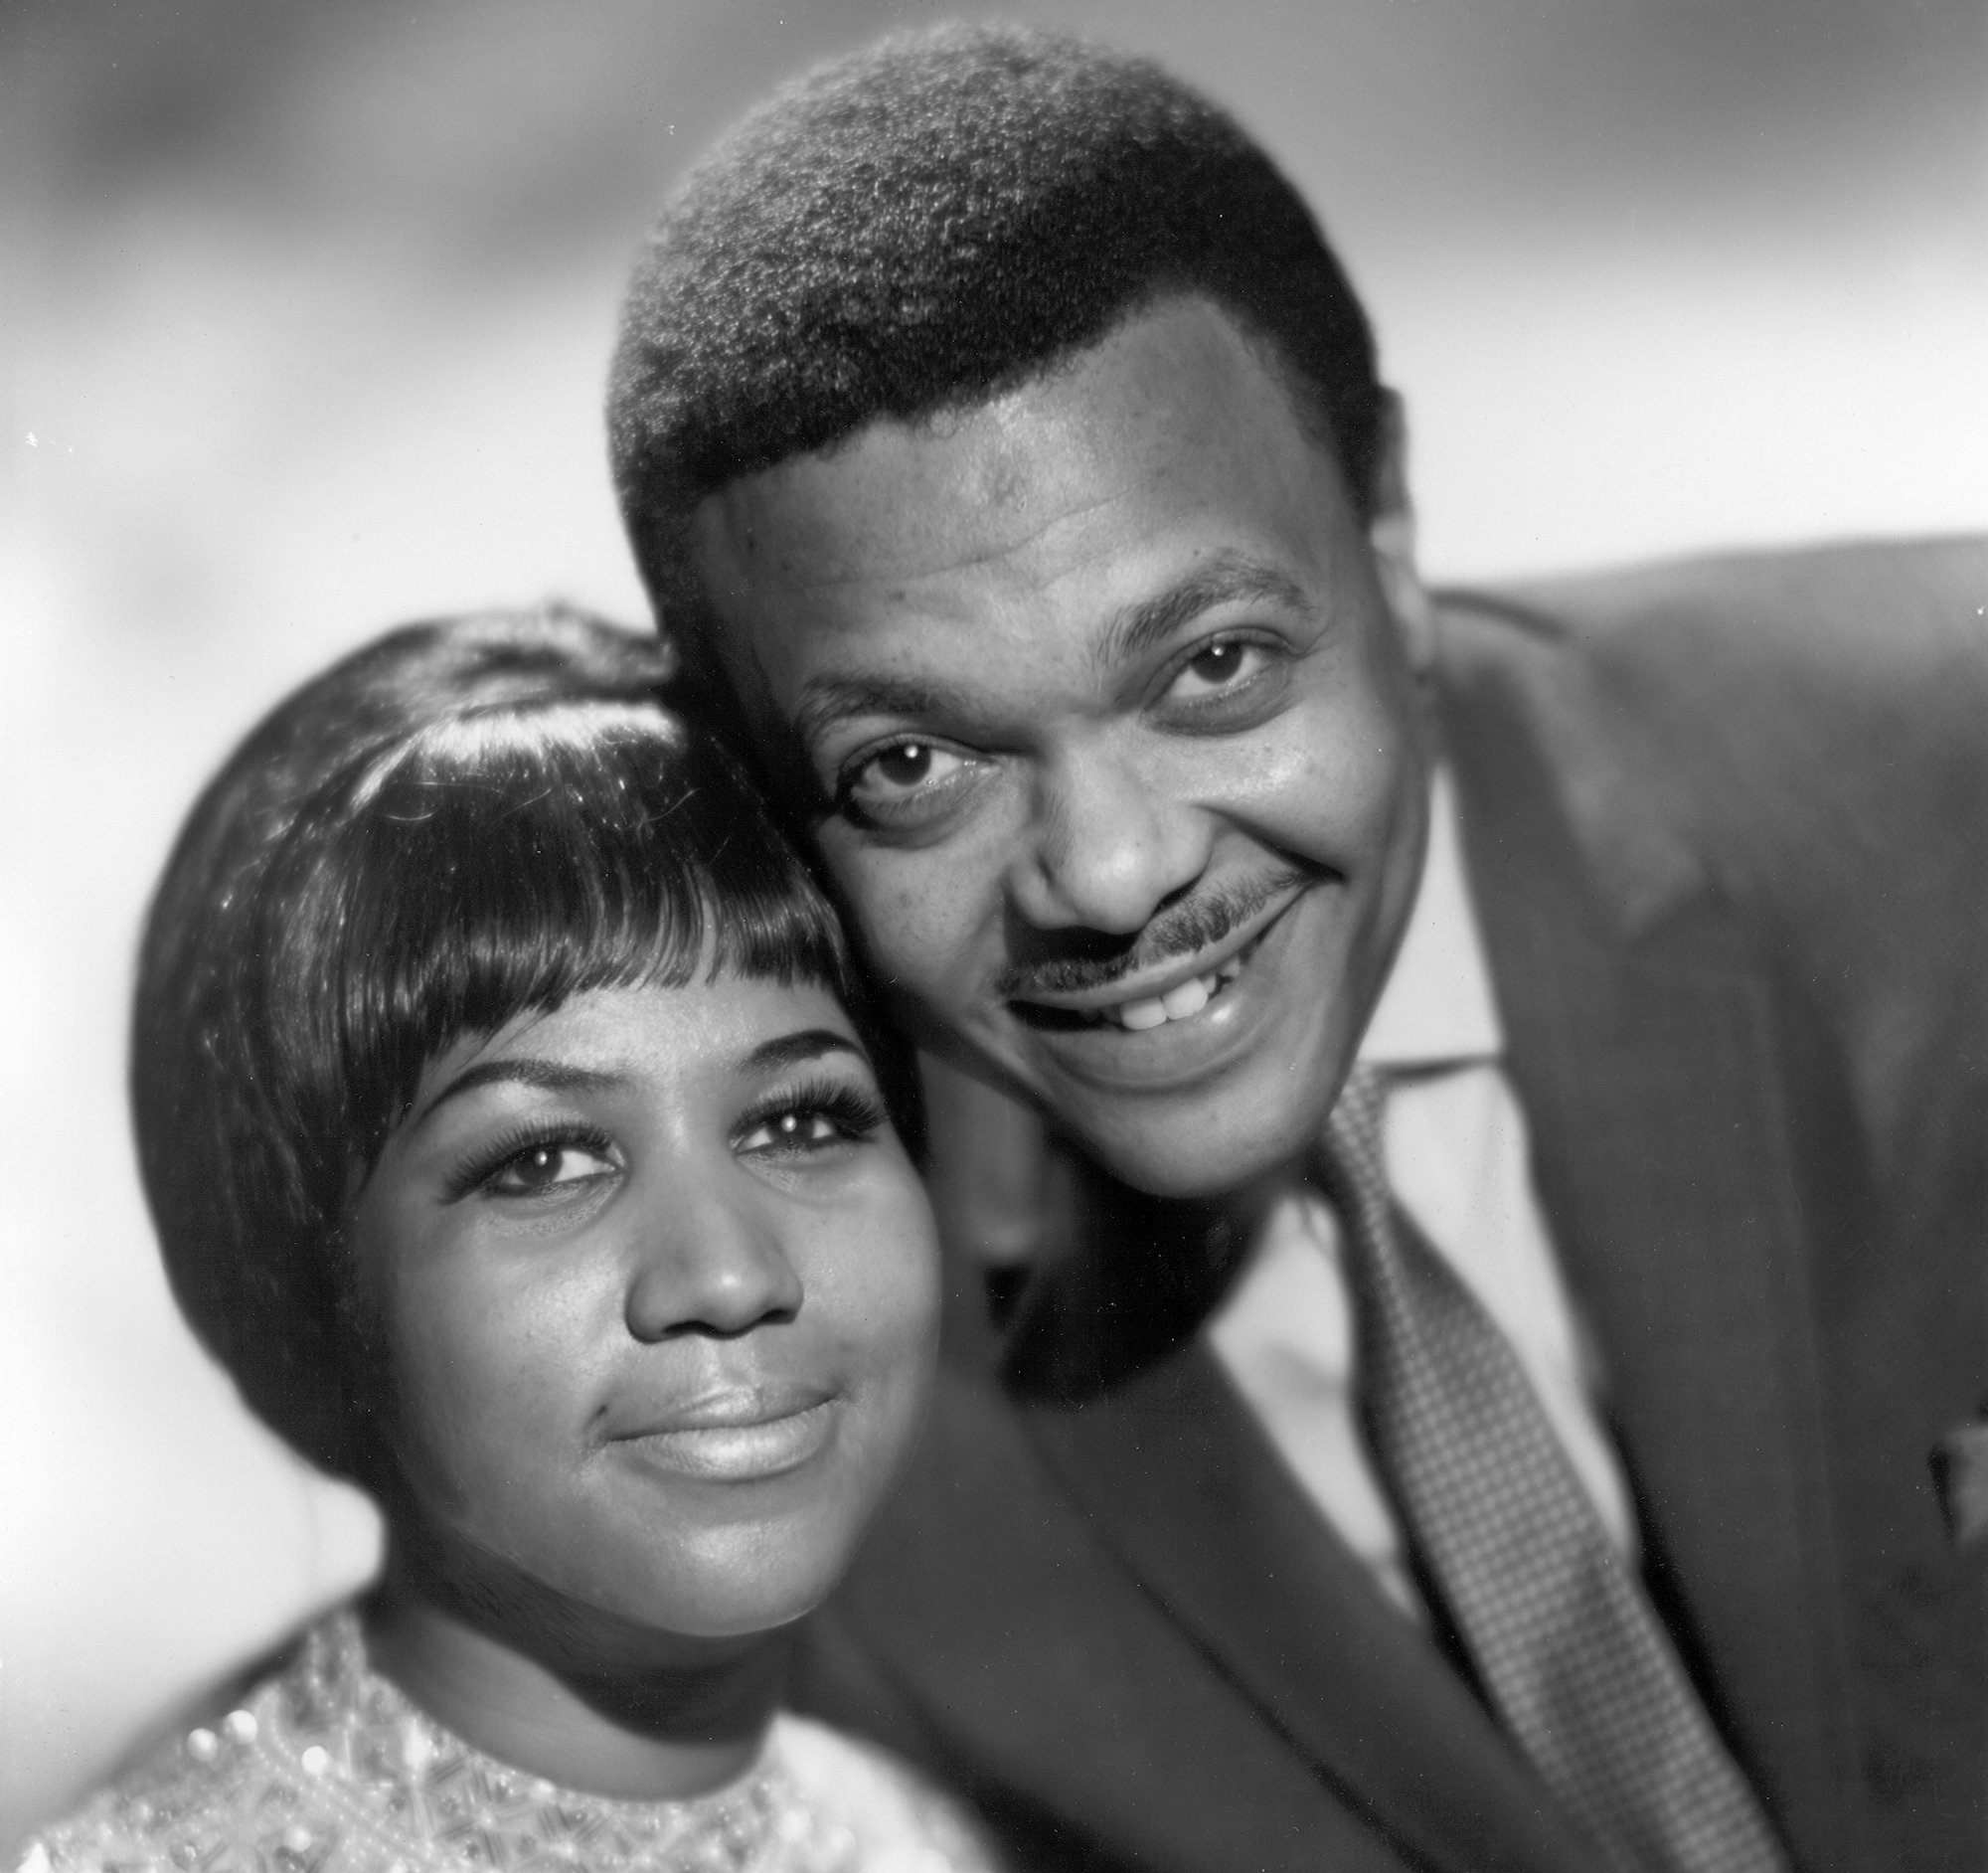 A portrait of Aretha Franklin posing with her first husband/ manager Ted White